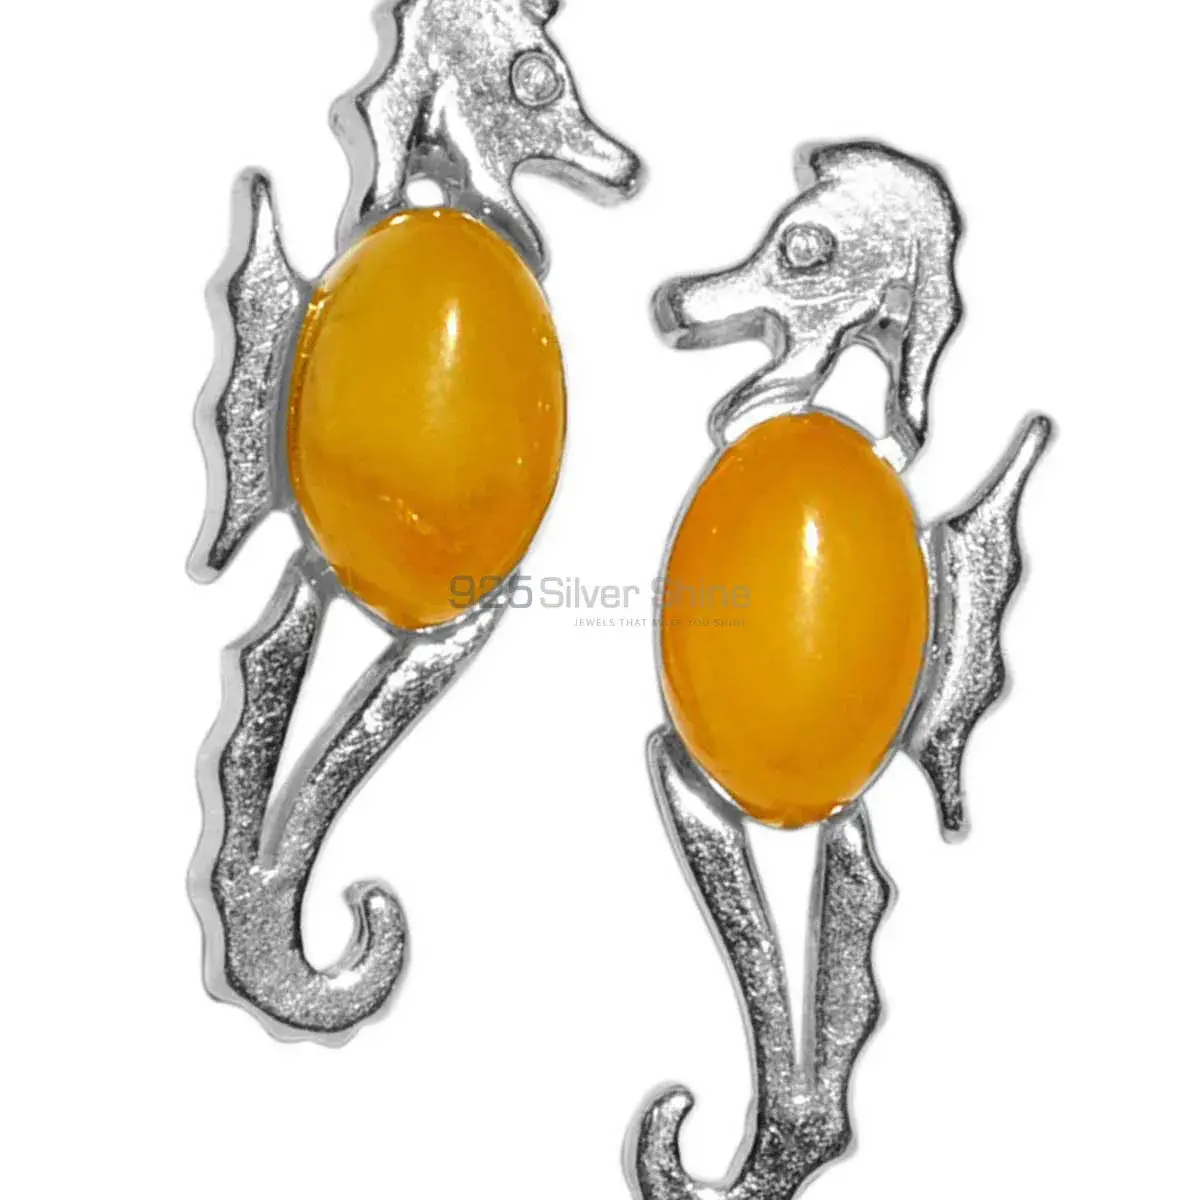 High Quality 925 Sterling Silver Earrings In Amber Gemstone Jewelry 925SE2931_0